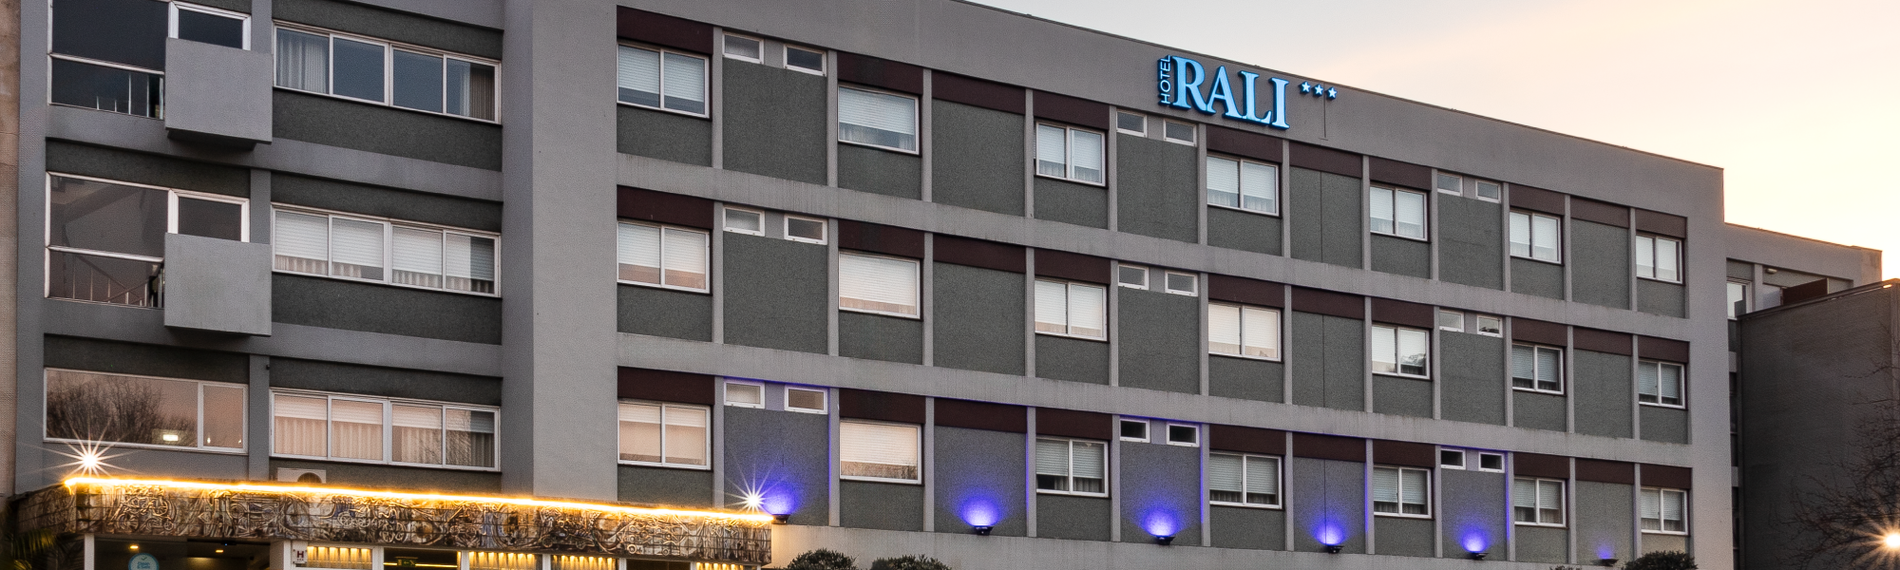 a large building with the word ralf on it